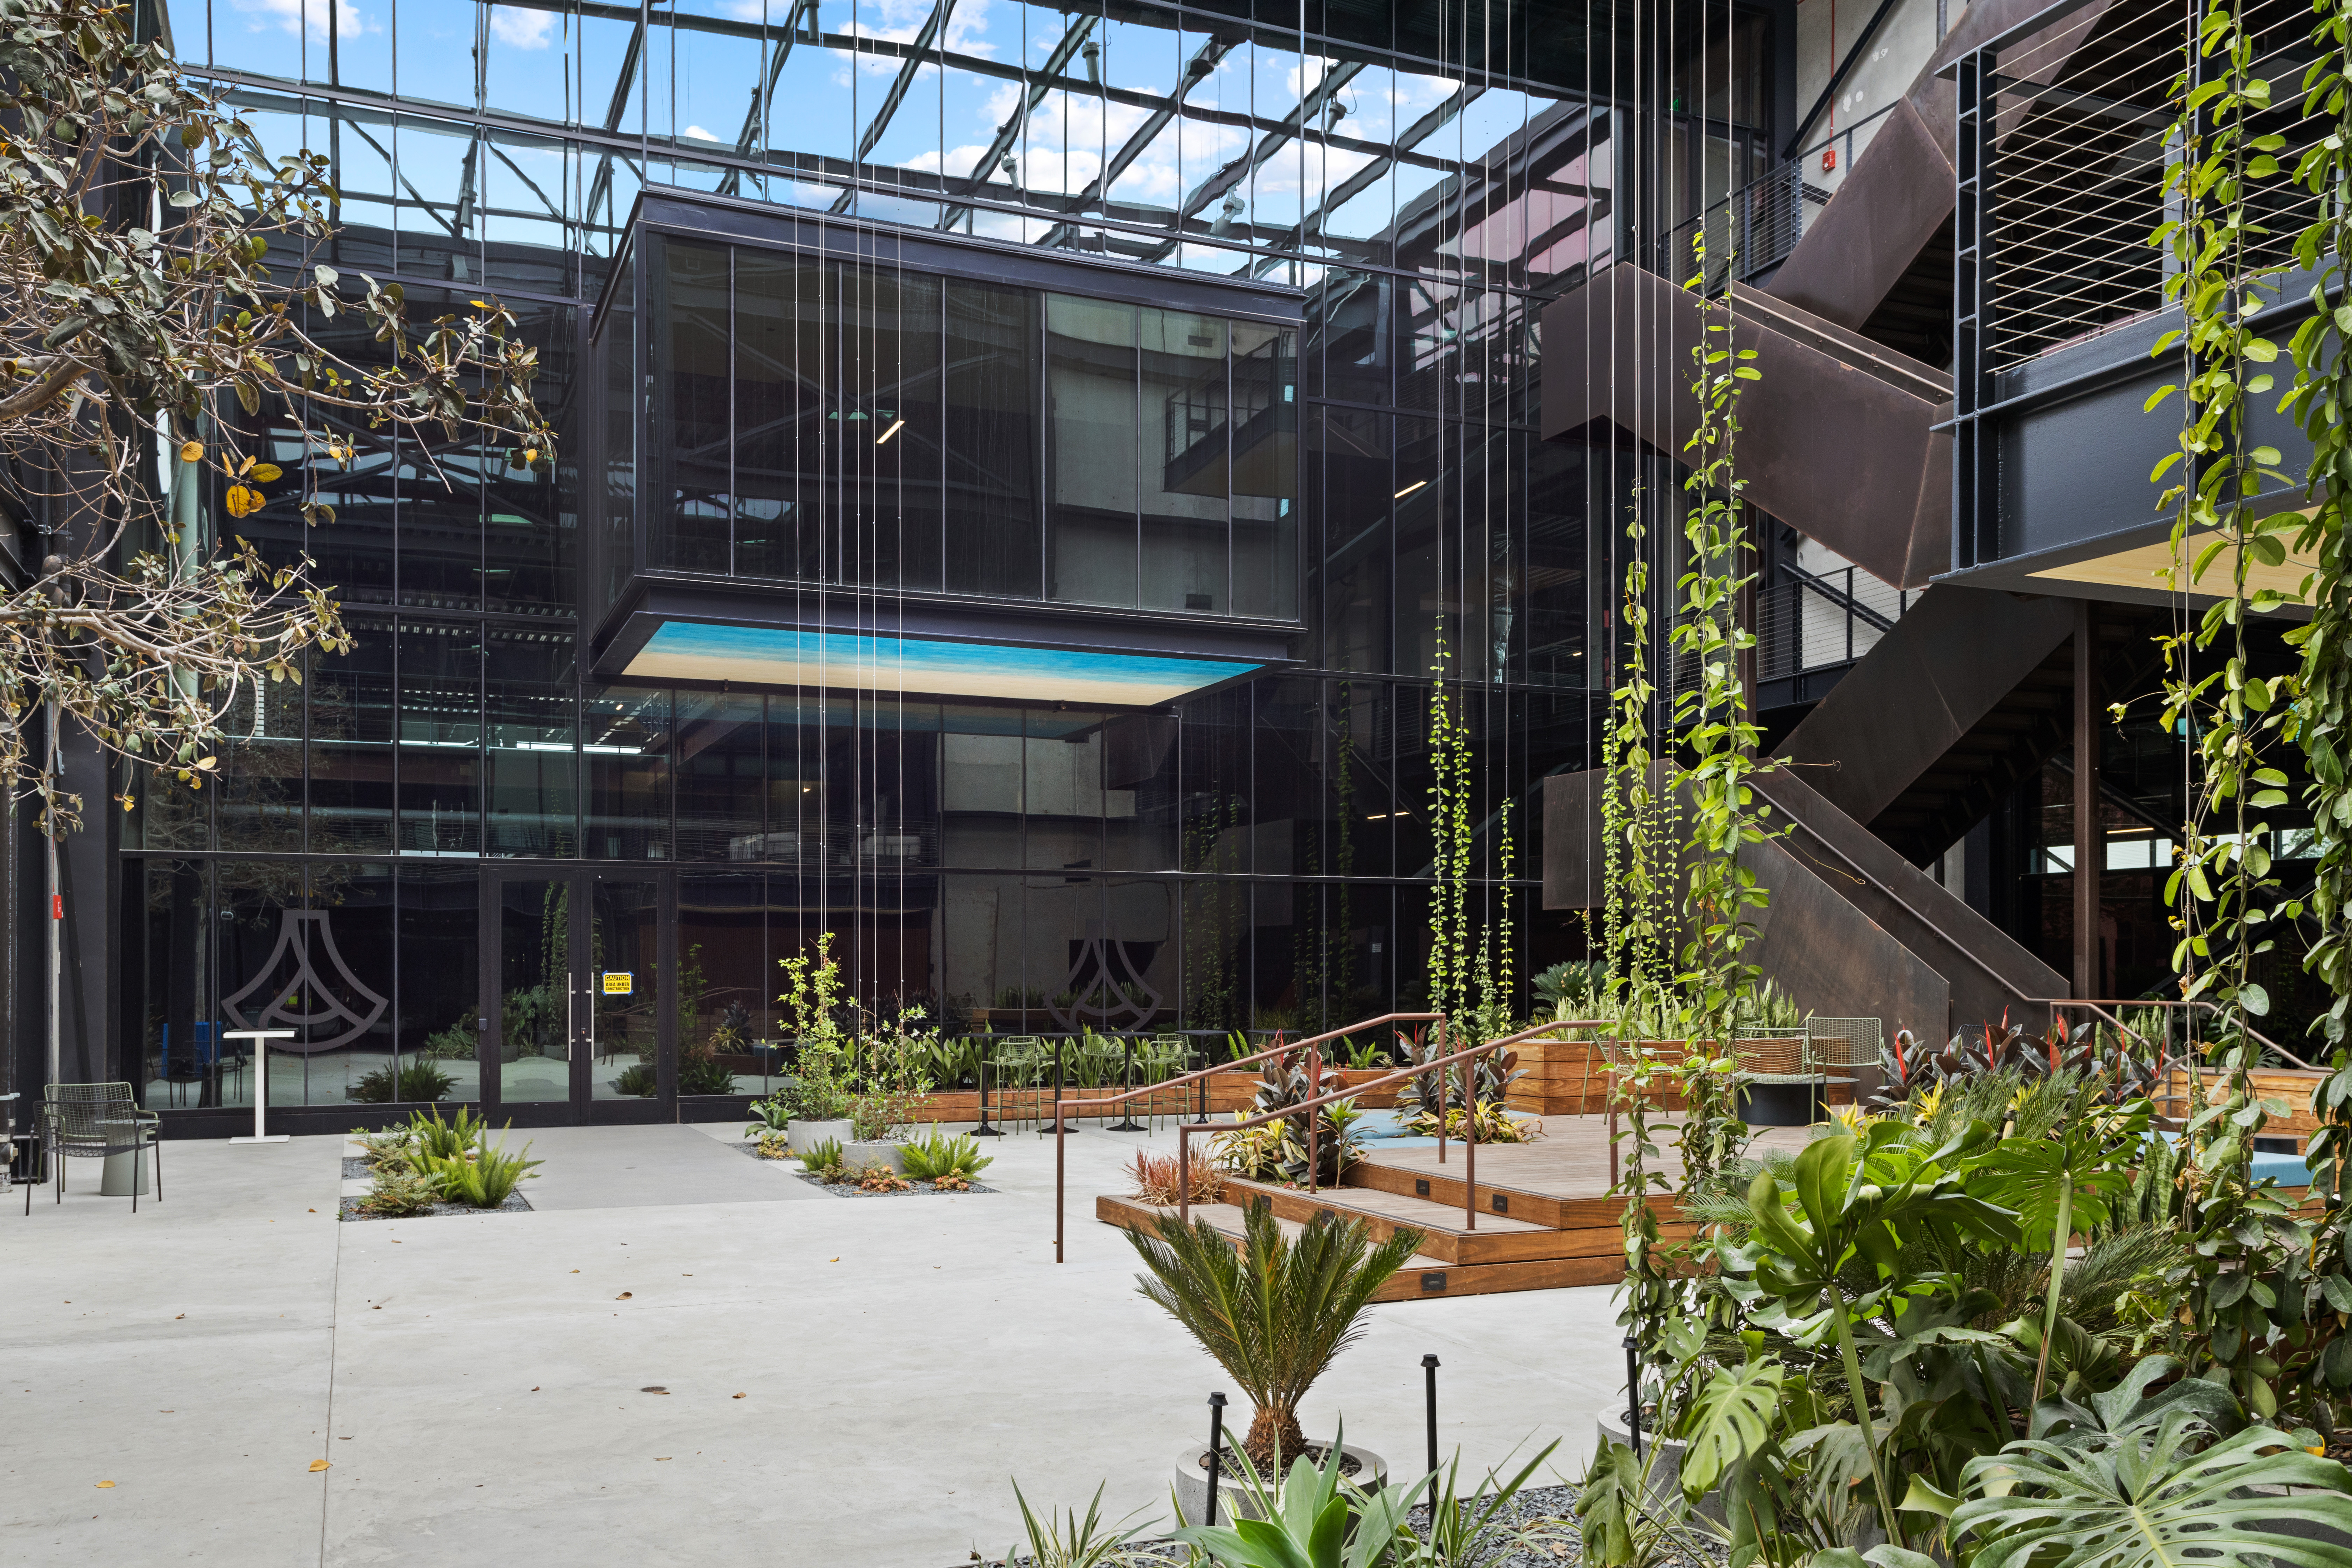 Photo of a covered courtyard with greenery at Anduril's headquarters